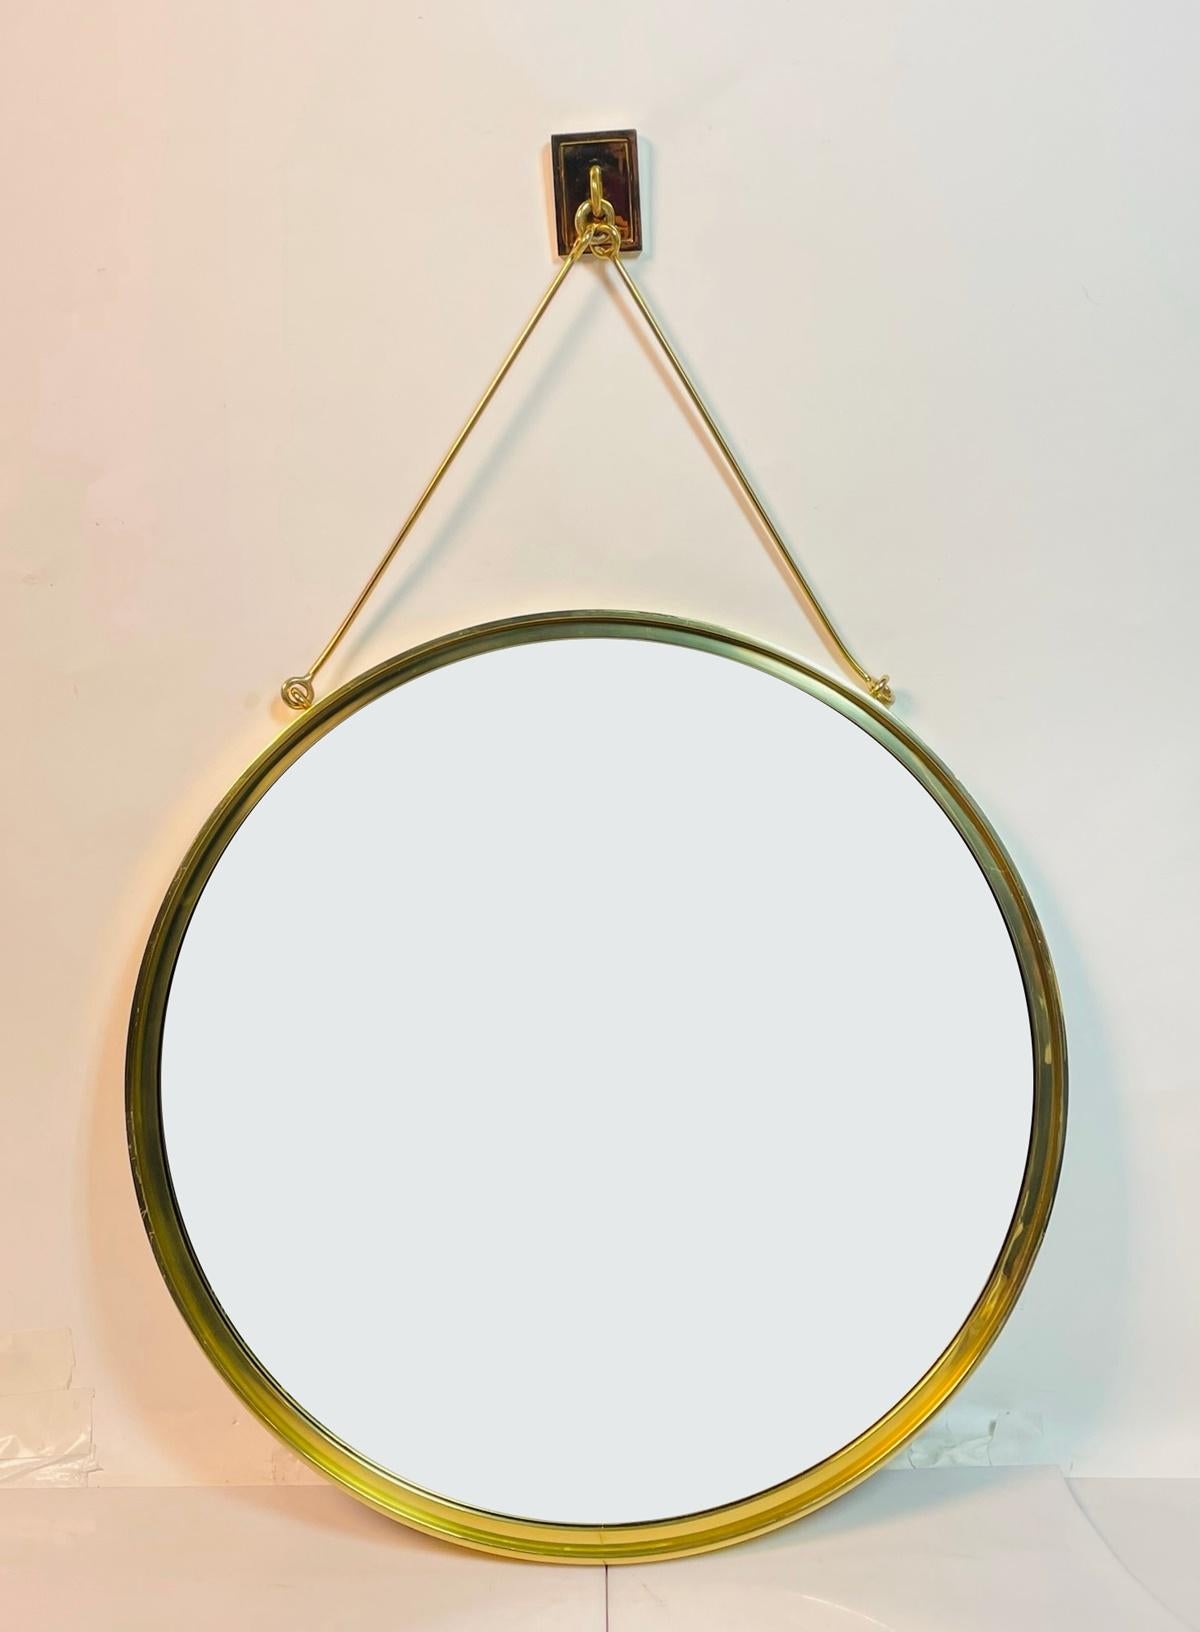 Add a touch of modern elegance to your space with the Contemporary Wall Mounted Brass Mirror by Waterworks. Crafted from high-quality brass, this stunning round mirror features a sleek gold finish that exudes sophistication. The unique stretcher